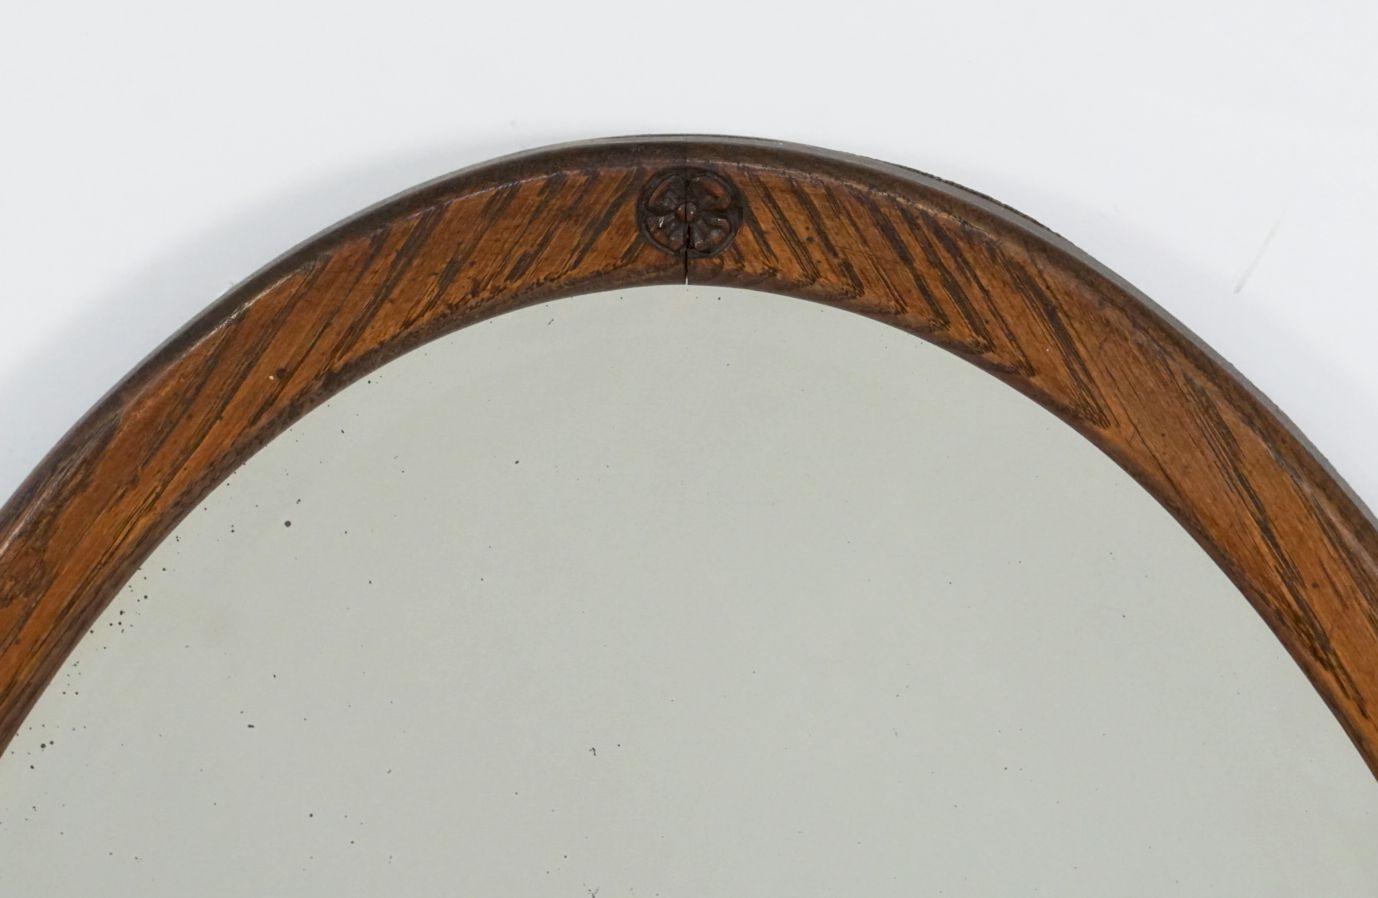 Edwardian English Oval Parlour Mirror with Beveled Glass and Oak Frame (H 27 3/4 x W 18)